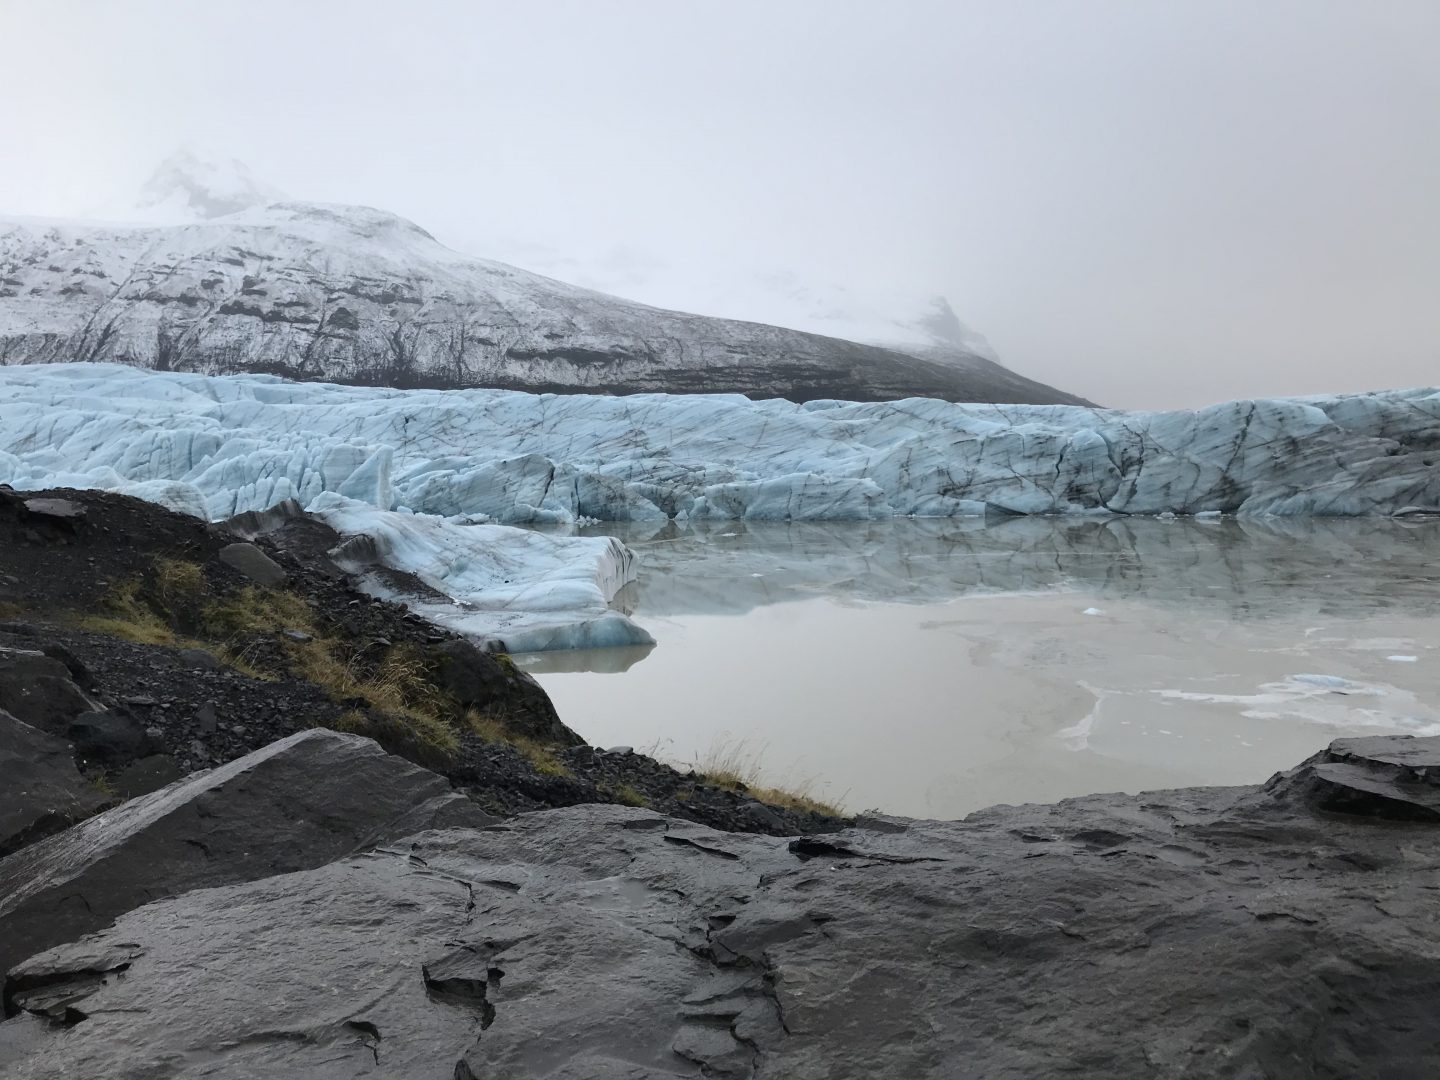 The Svínafellsjökull glacier in Iceland. Glacial retreat is among the most visible impacts of climate change. Since the early 20th century, with few exceptions, glaciers around the world have been retreating at unprecedented rates. 